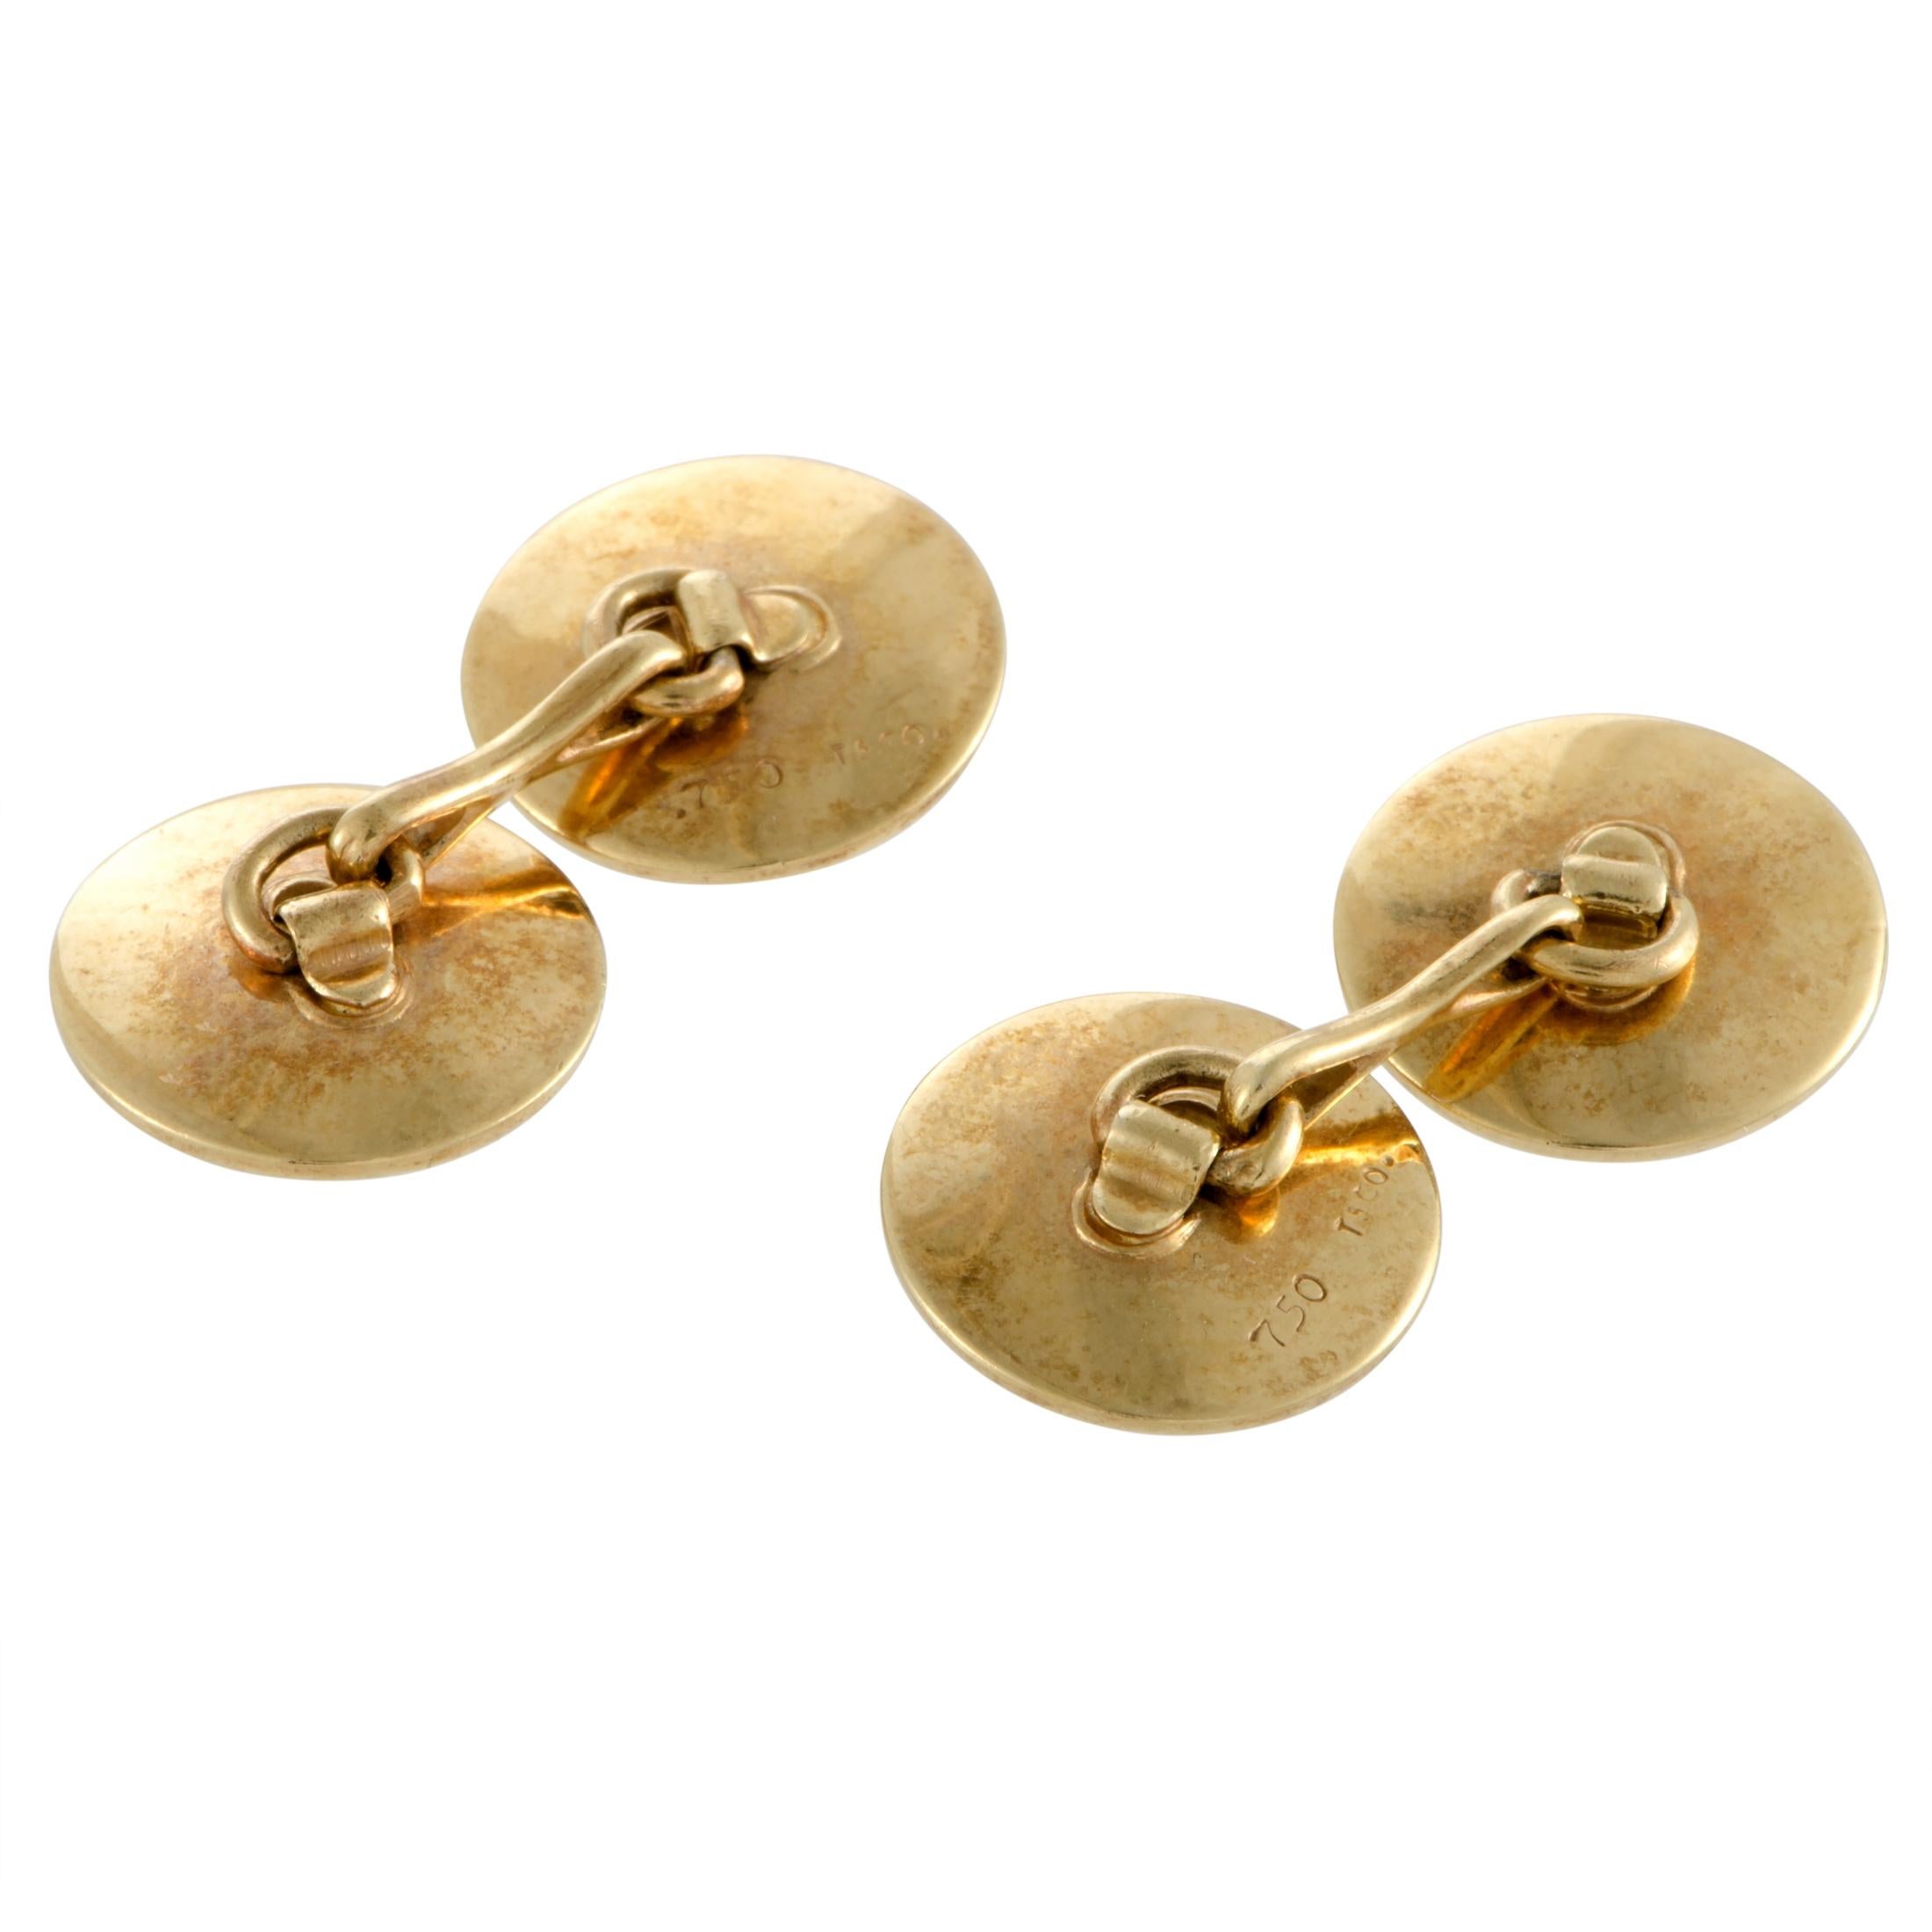 Relying on the inherent prestigious appeal of radiant 18K yellow gold and bringing out its remarkable aesthetic quality through exquisite craftsmanship, Tiffany & Co. created this sumptuous pair of cufflinks exuding understated excellence and fine